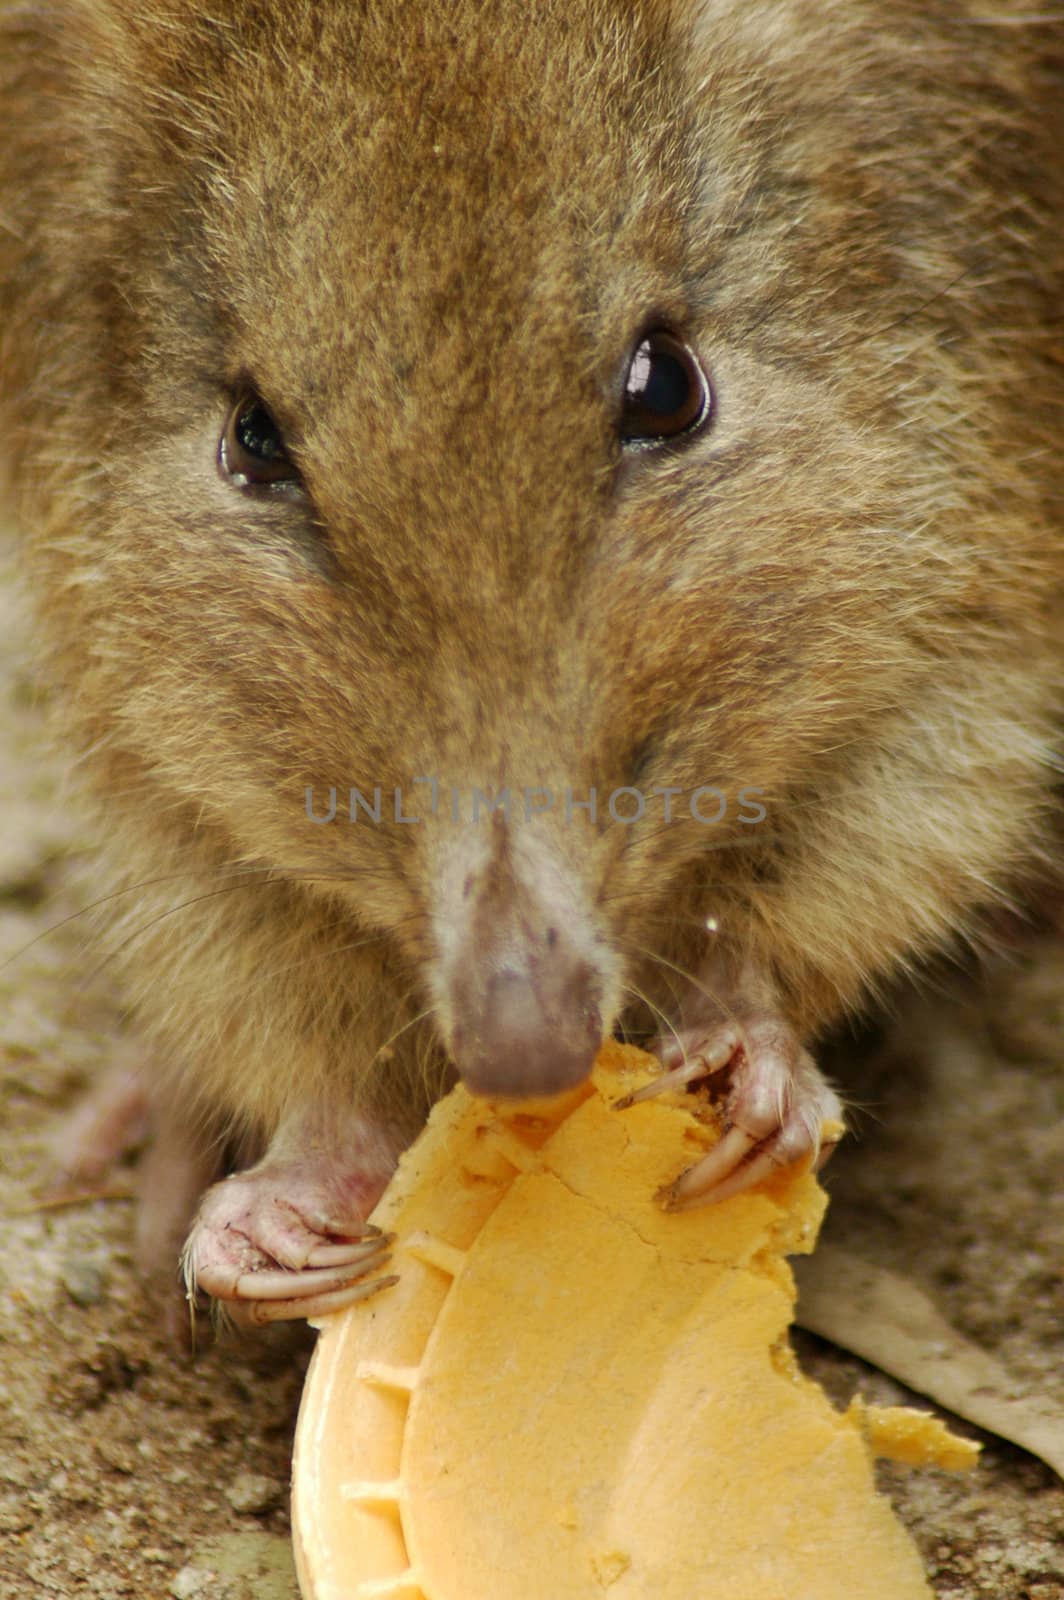 detail photo of a mouse eating cornet